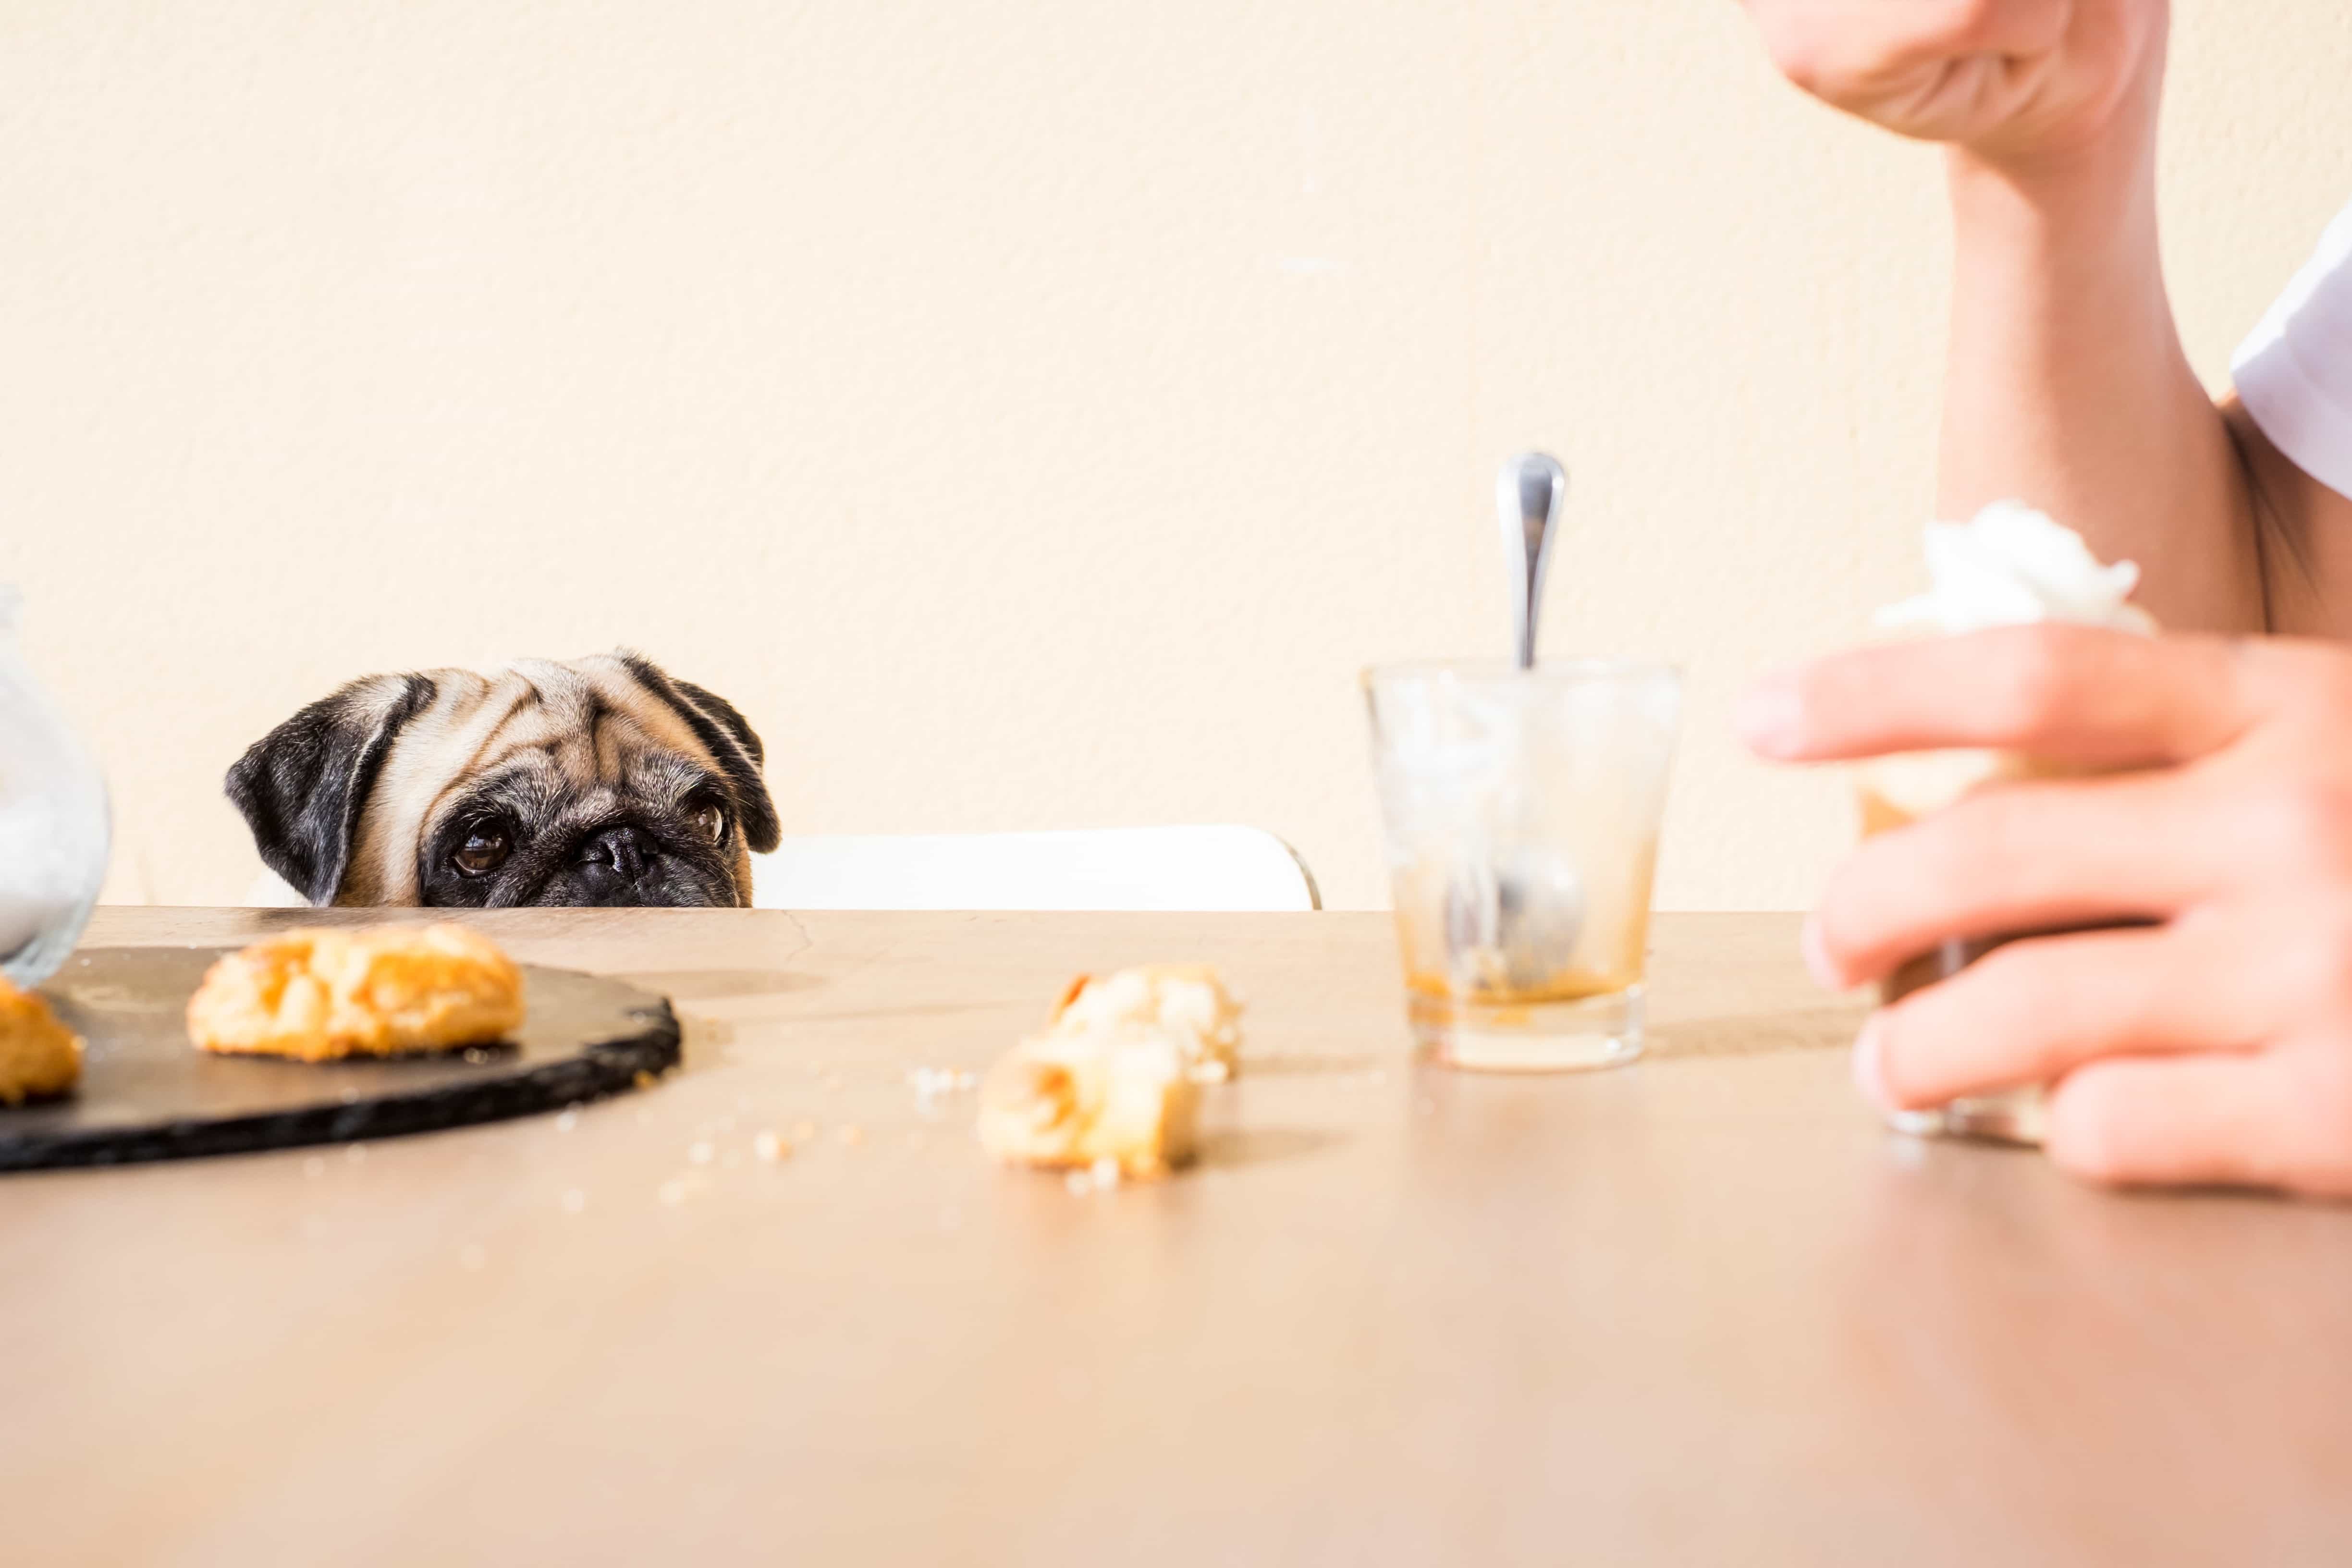 26 Common Foods and Liquids That Are Poisonous to Dogs - GoodRx